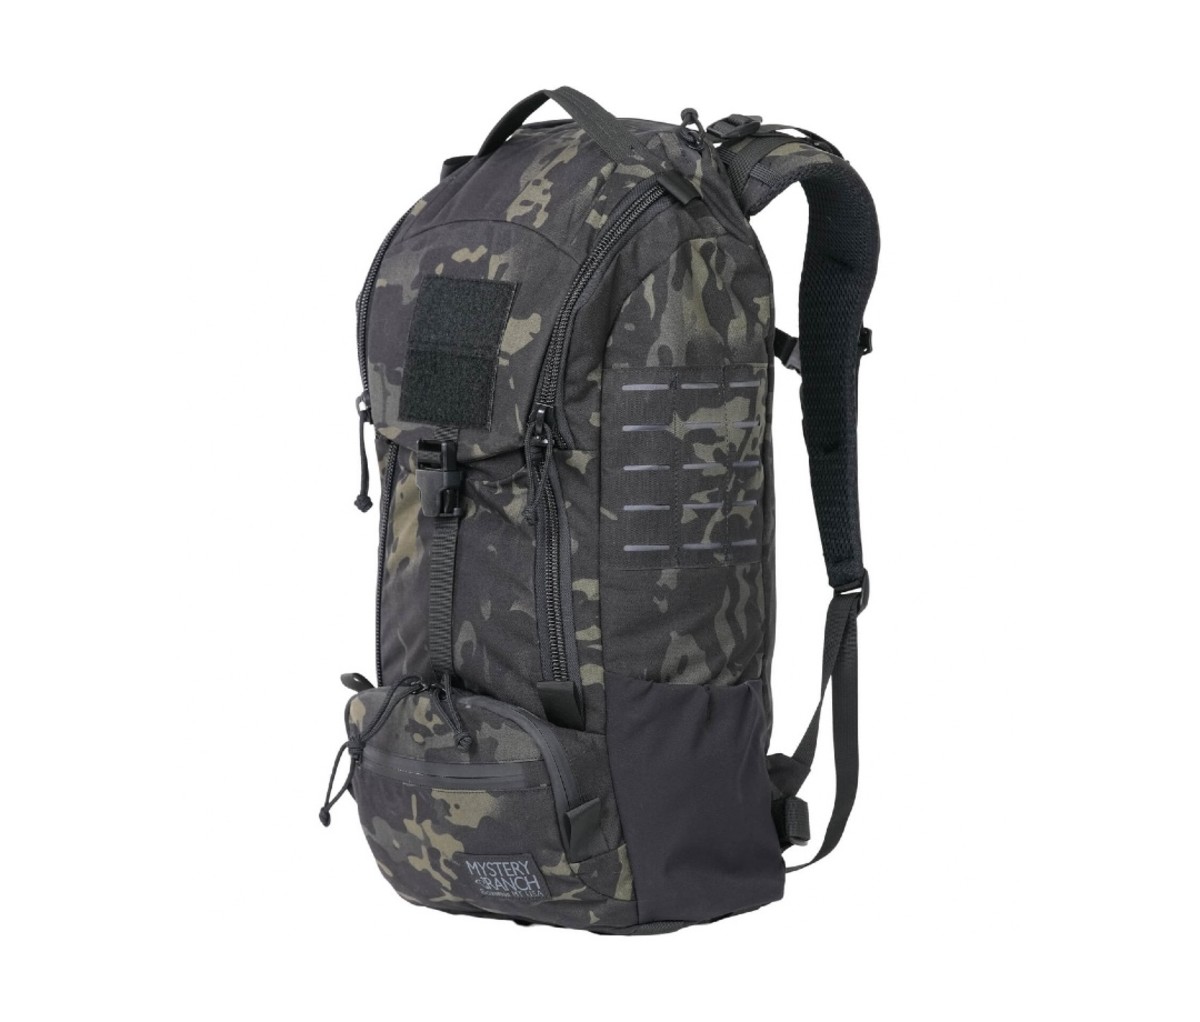 Dark camo pattern backpack on a white background.